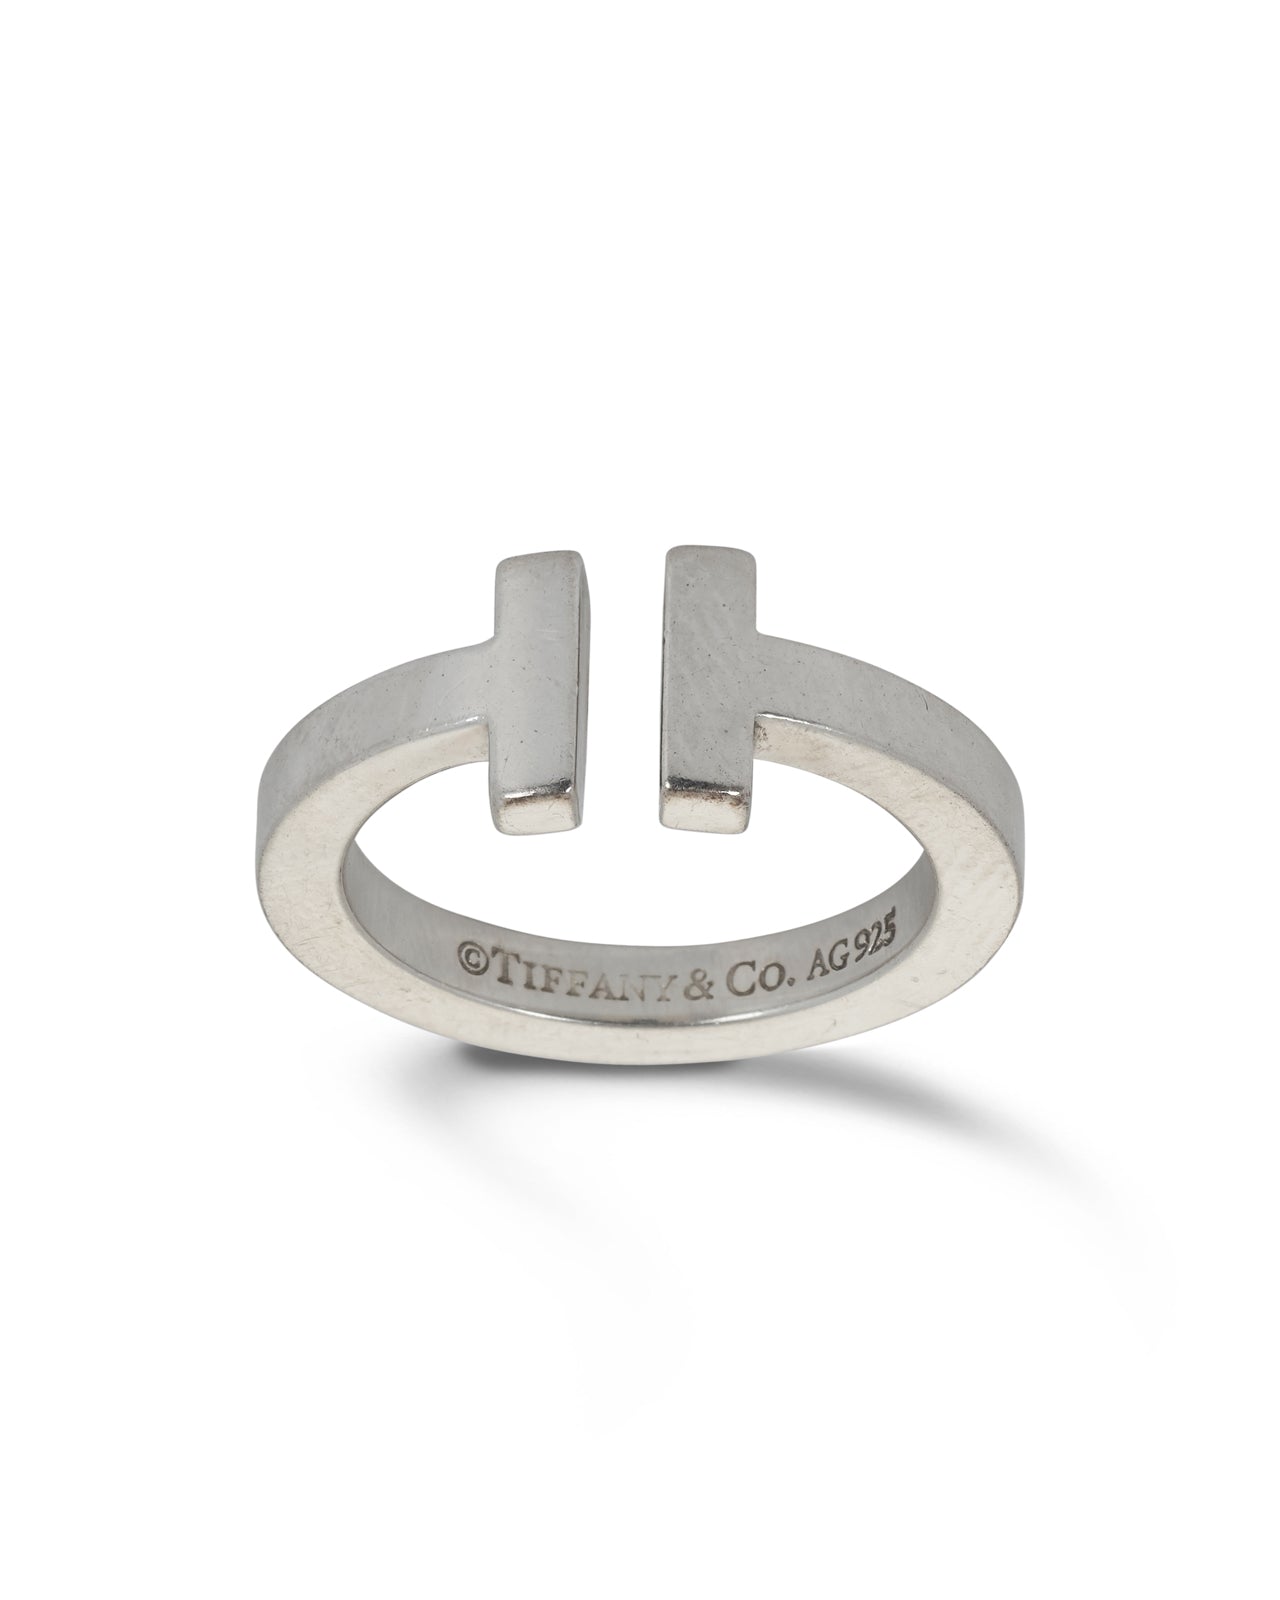 Sterling Silver 'T' Ring, TIFFANY & Co.